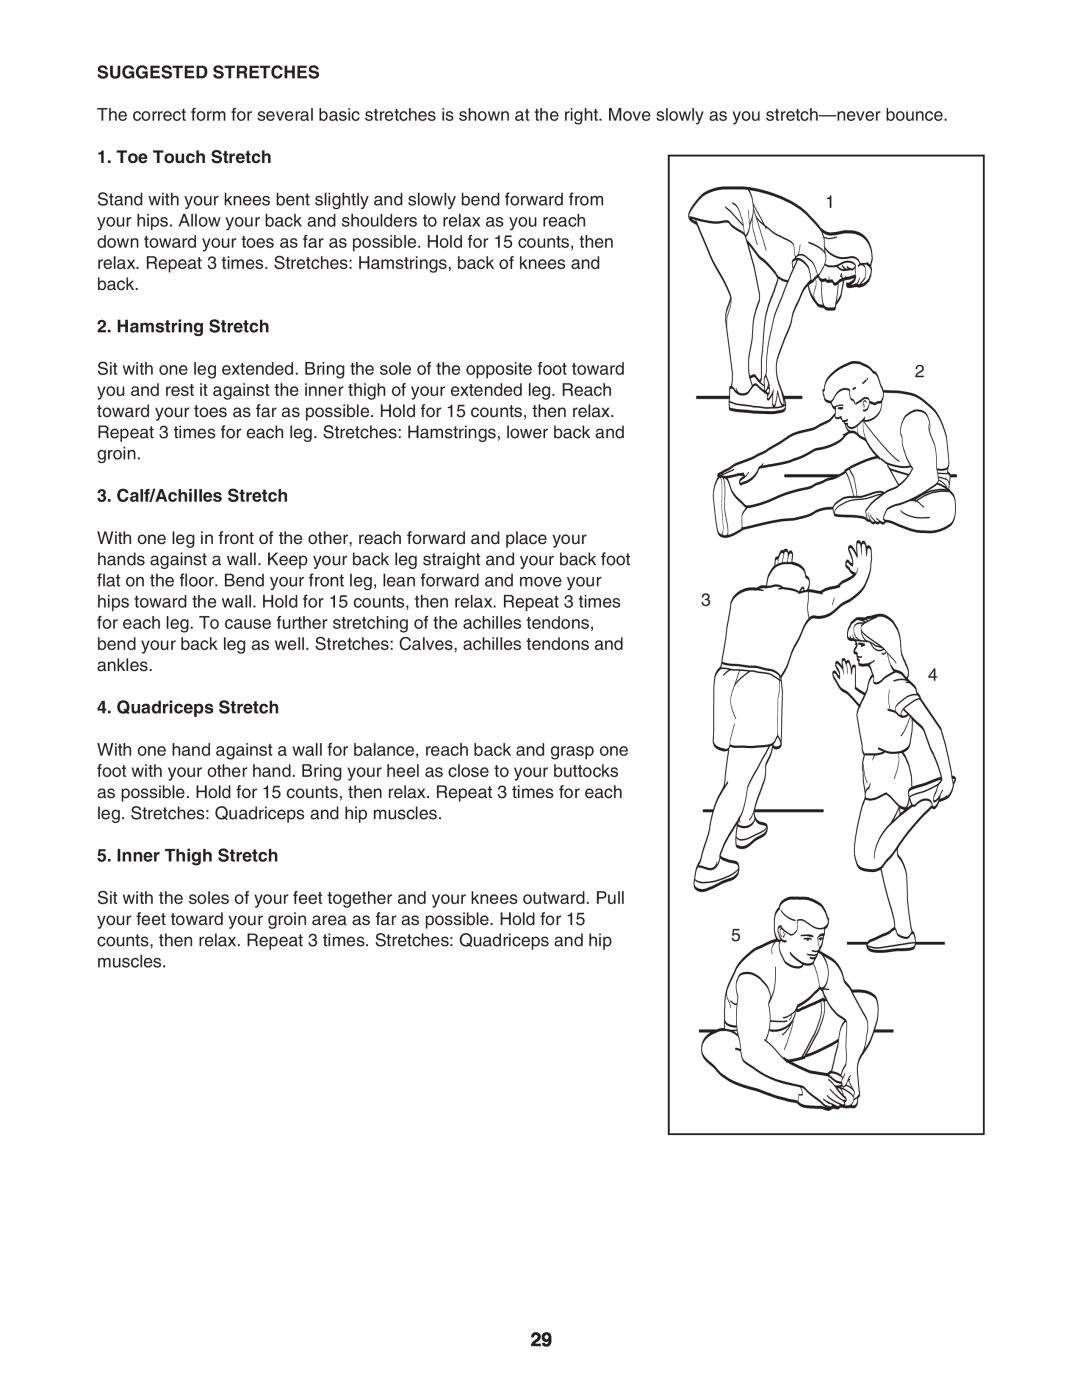 Gold's Gym CWTL05607 Suggested Stretches, Toe Touch Stretch, Hamstring Stretch, Calf/Achilles Stretch, Quadriceps Stretch 